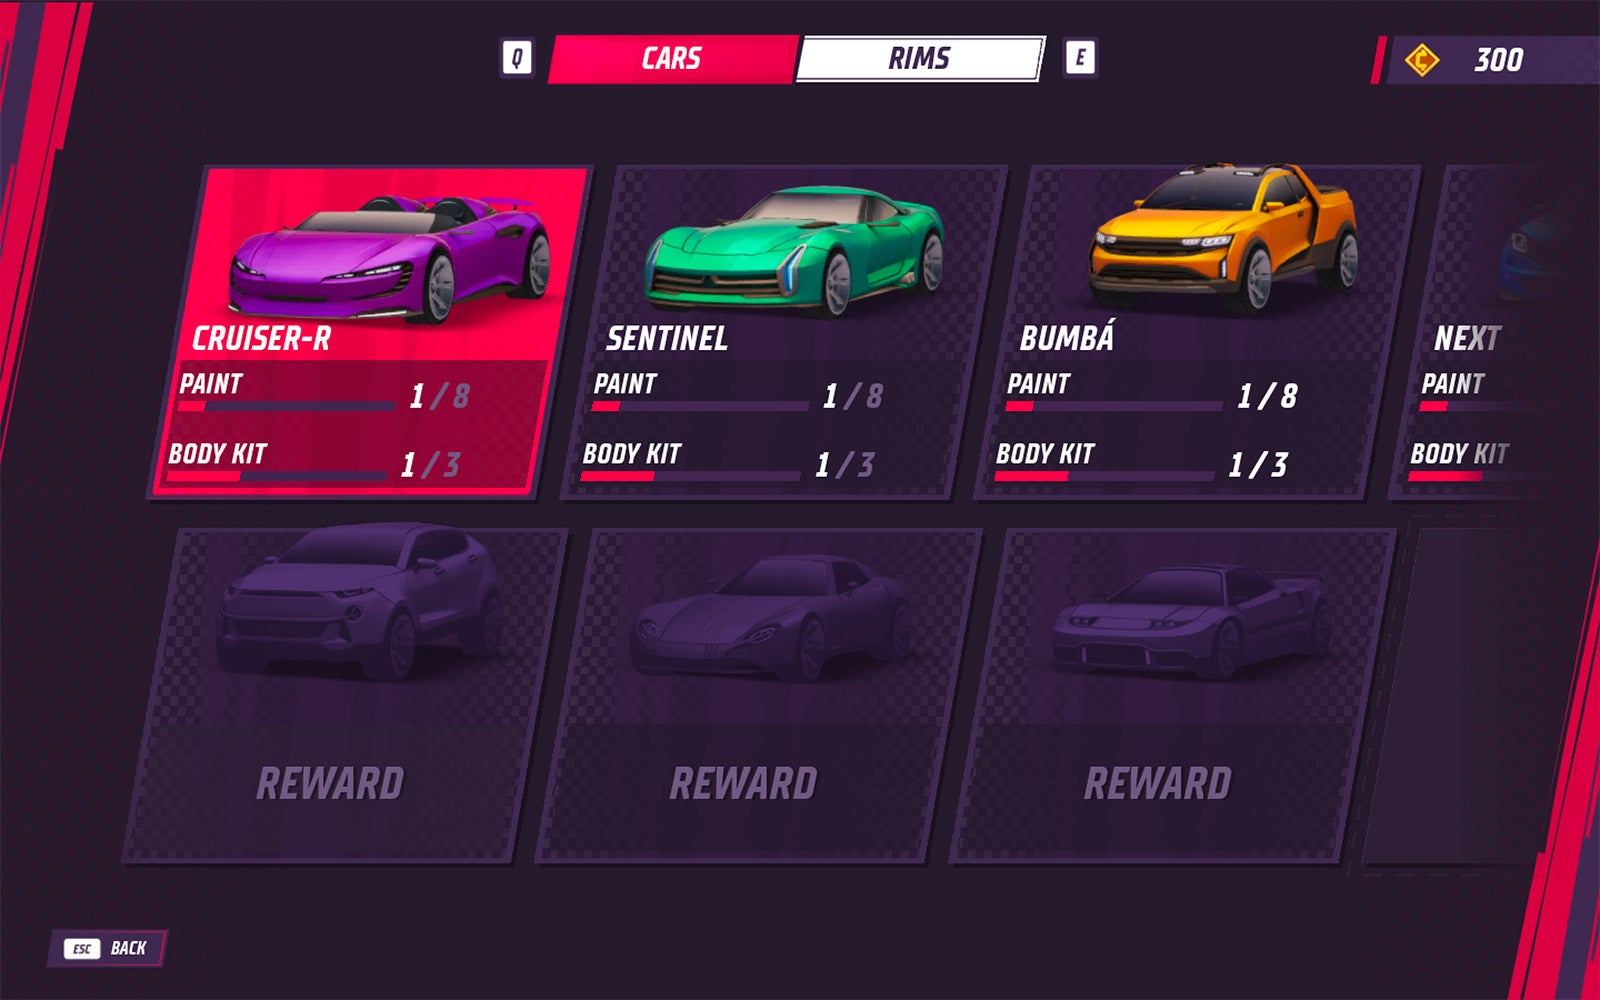 Horizon Chase 2 Is Here for Your New Old Racing Game Fix